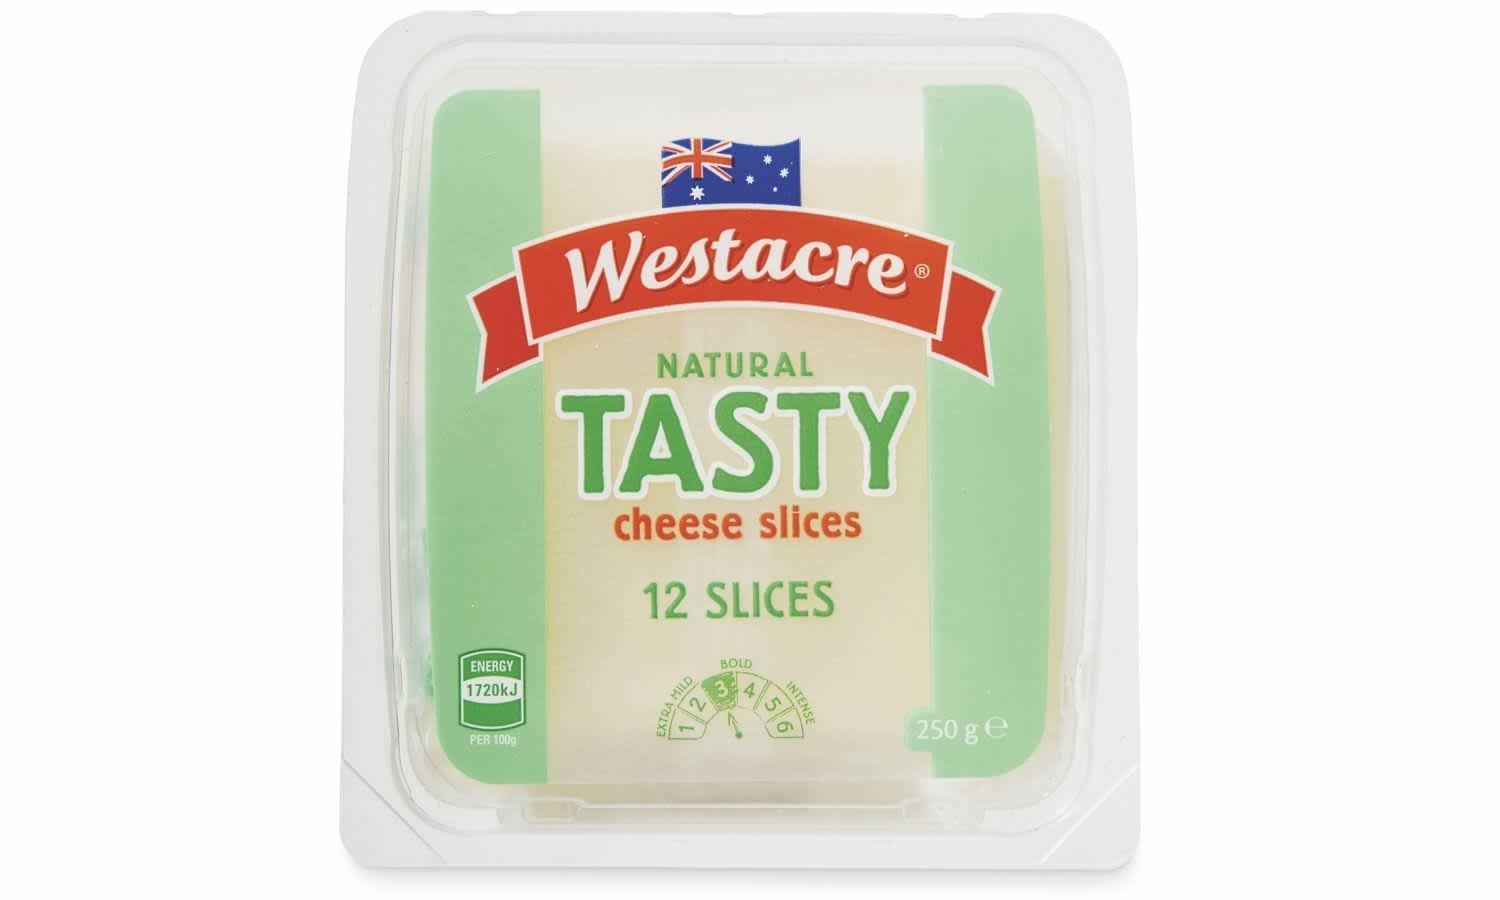 Westacre cheese slices